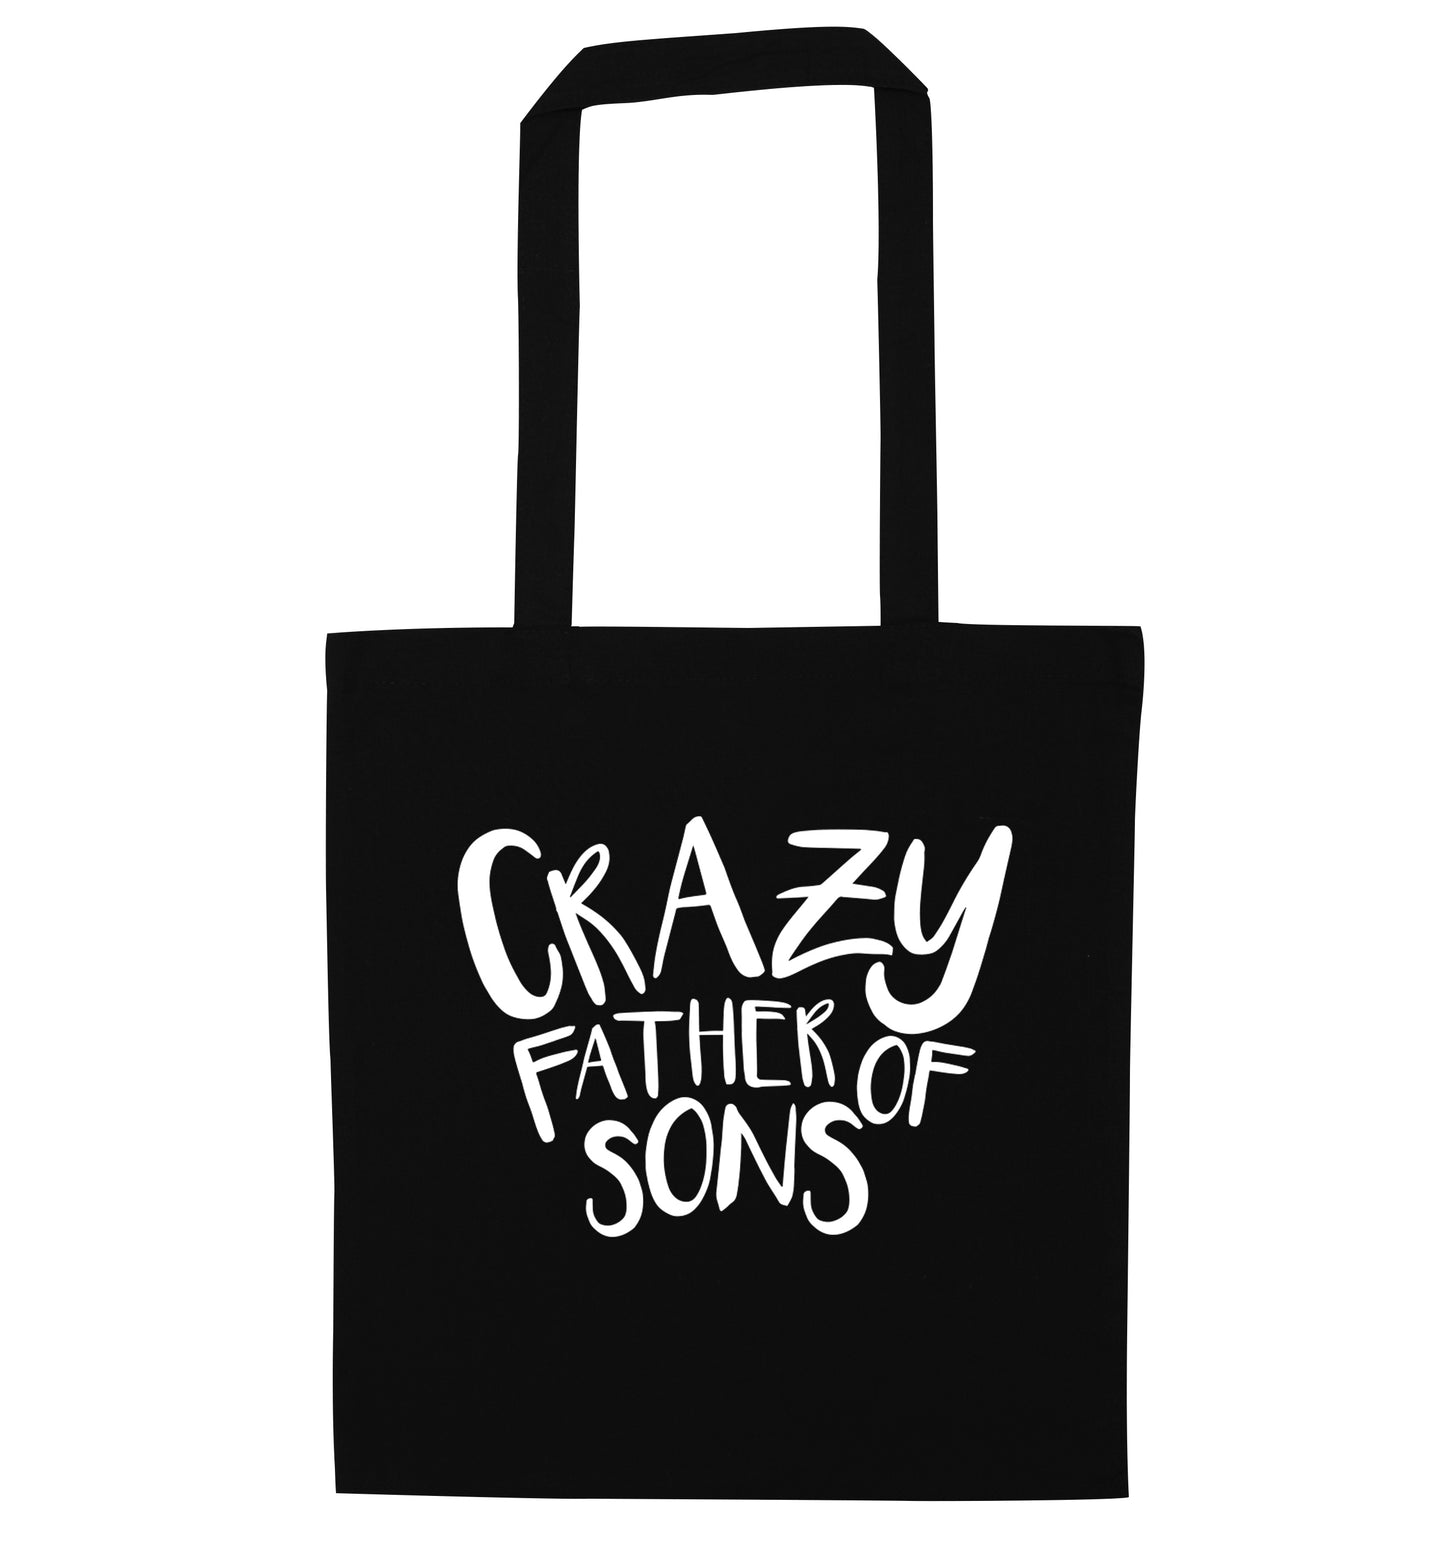 Crazy father of sons black tote bag